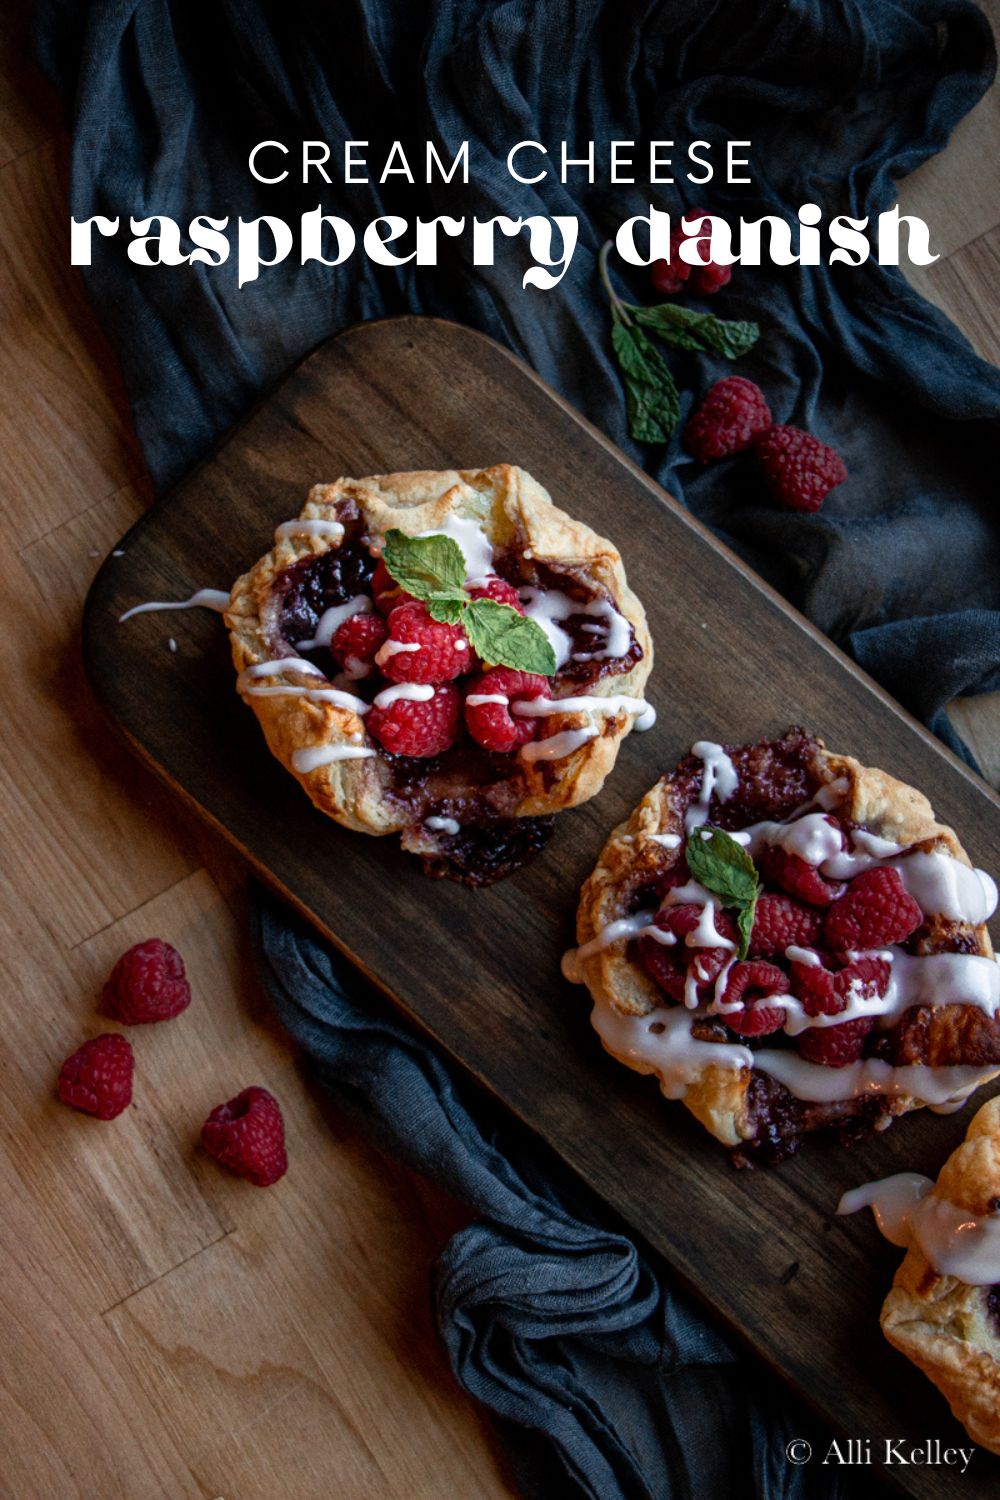 Full of bright, fruity flavor and just the right amount of sweetness, this raspberry danish is the perfect everyday treat! With its puff pastry crust, rich cream cheese, and a generous layer of raspberry jam, this raspberry danish recipe never disappoints!